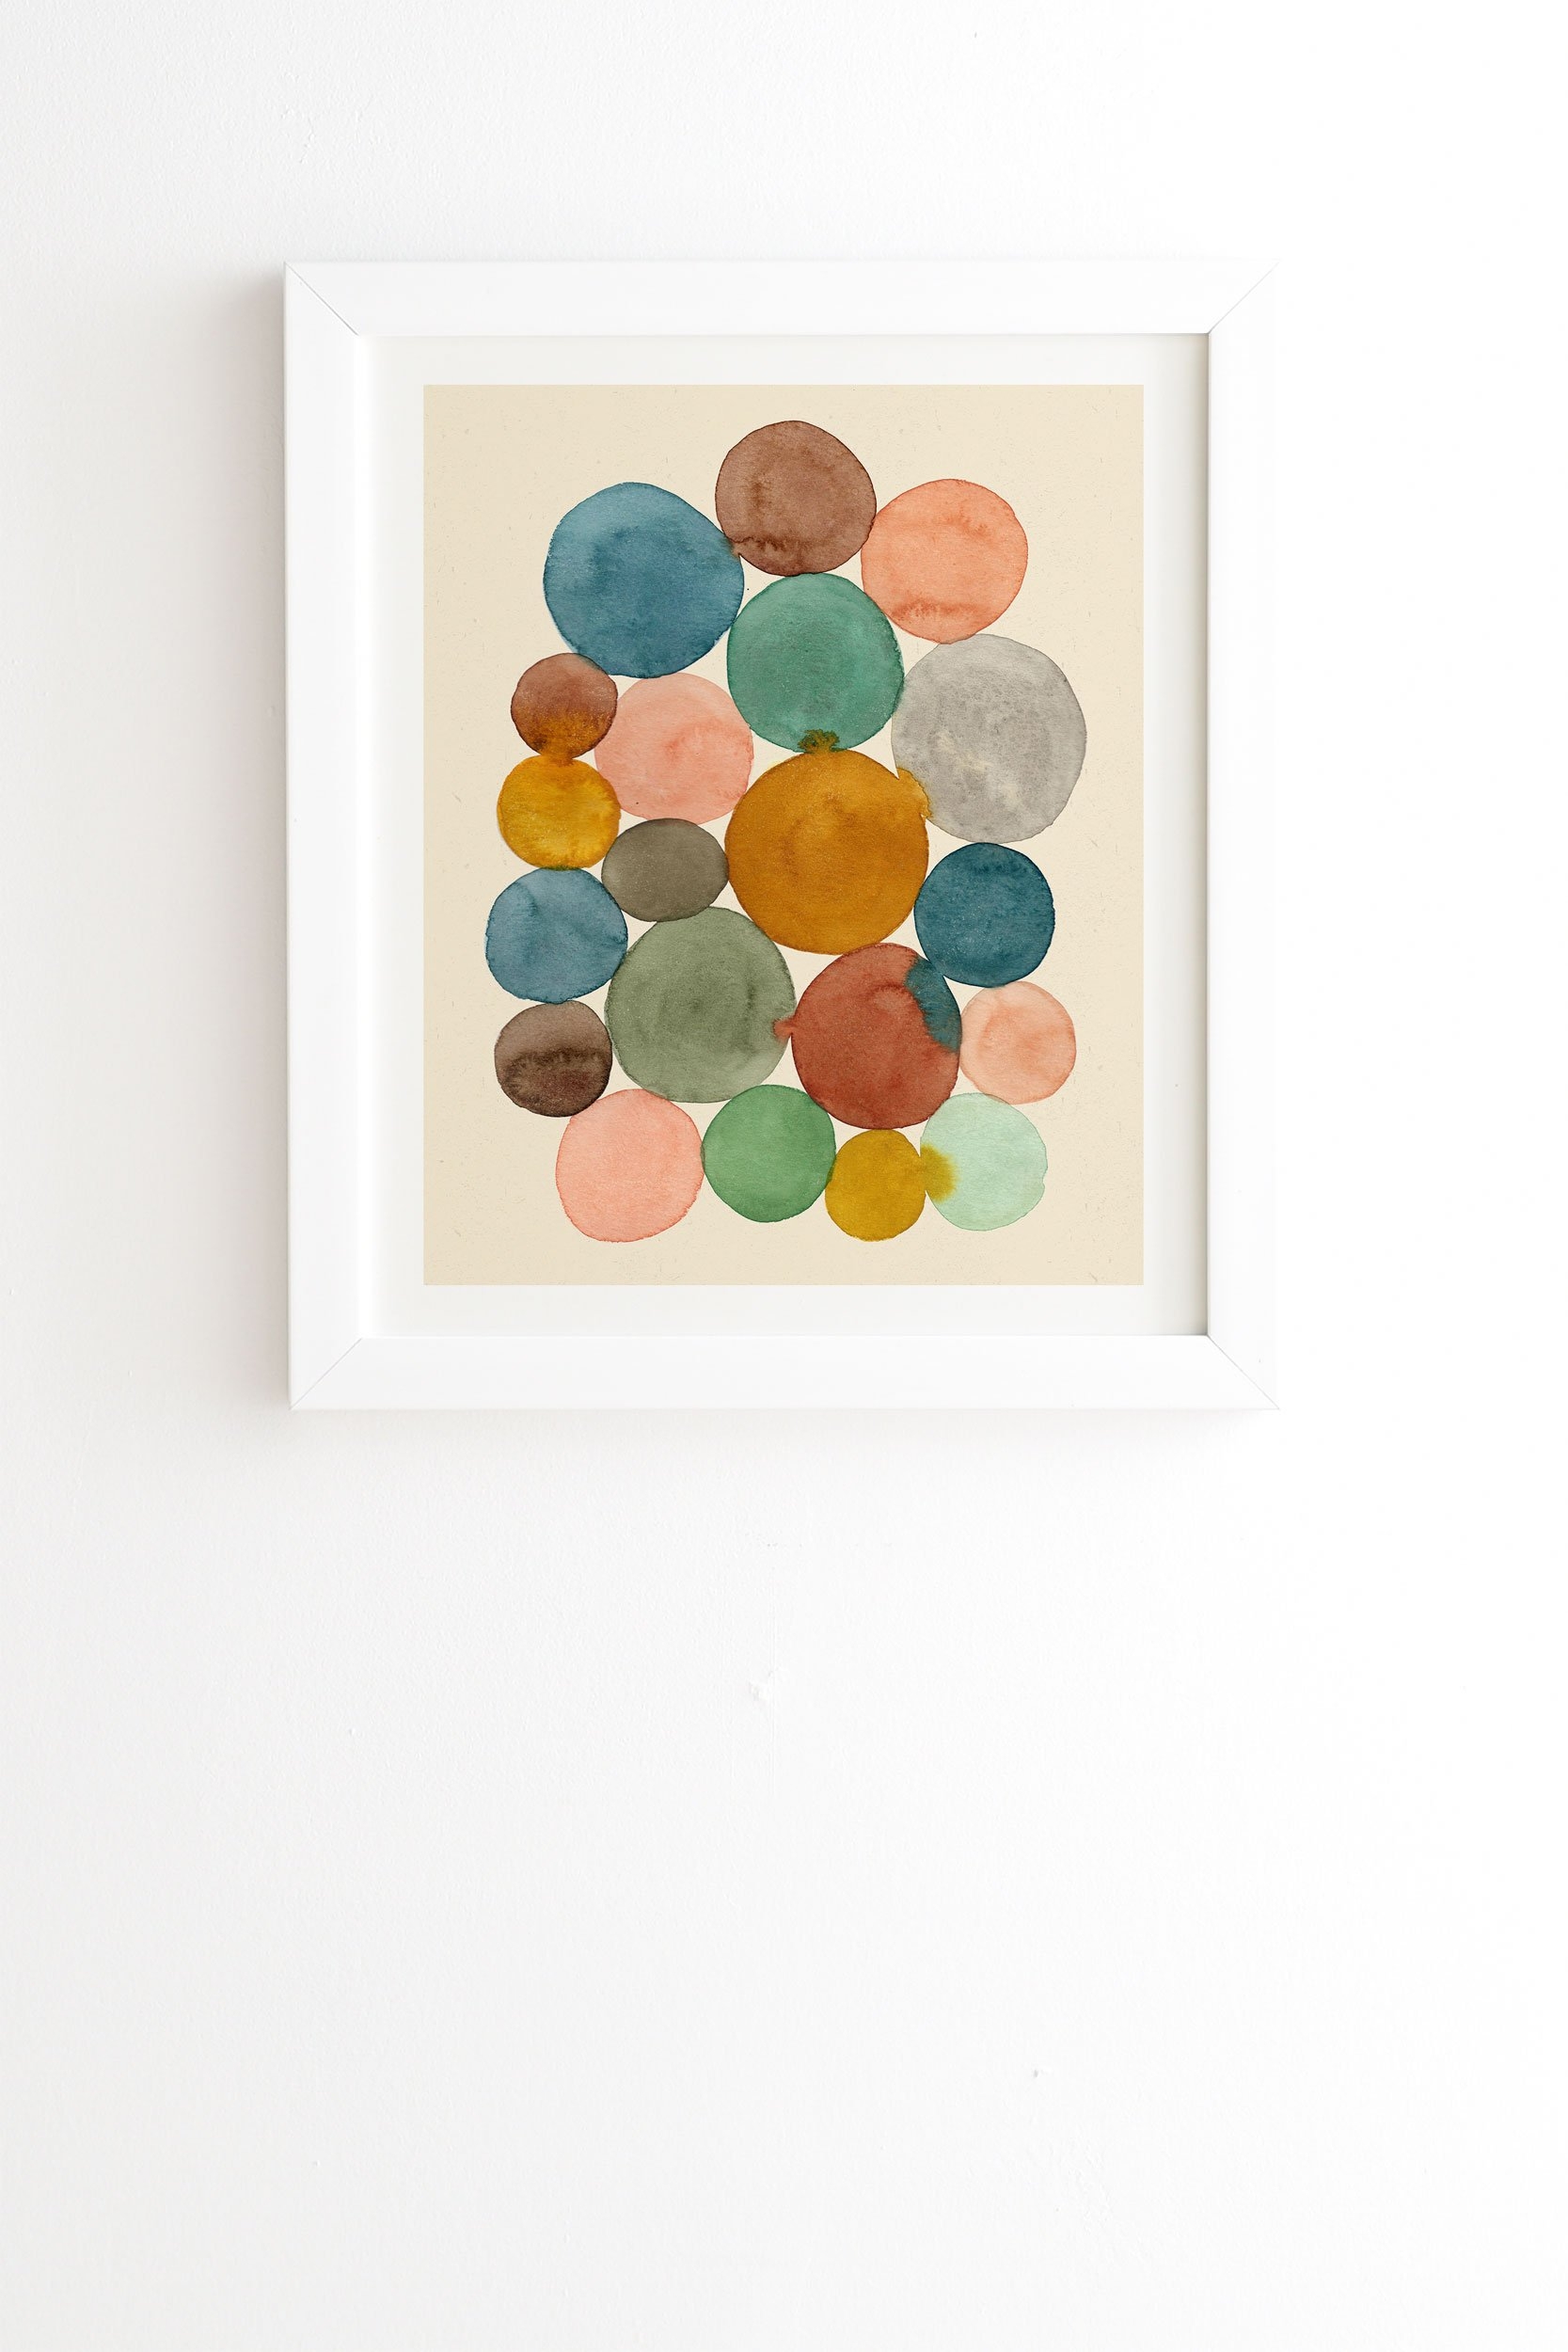 Connected Dots Framed Wall Art - 14x16.5 - Basic White Frame - With mat - Image 0